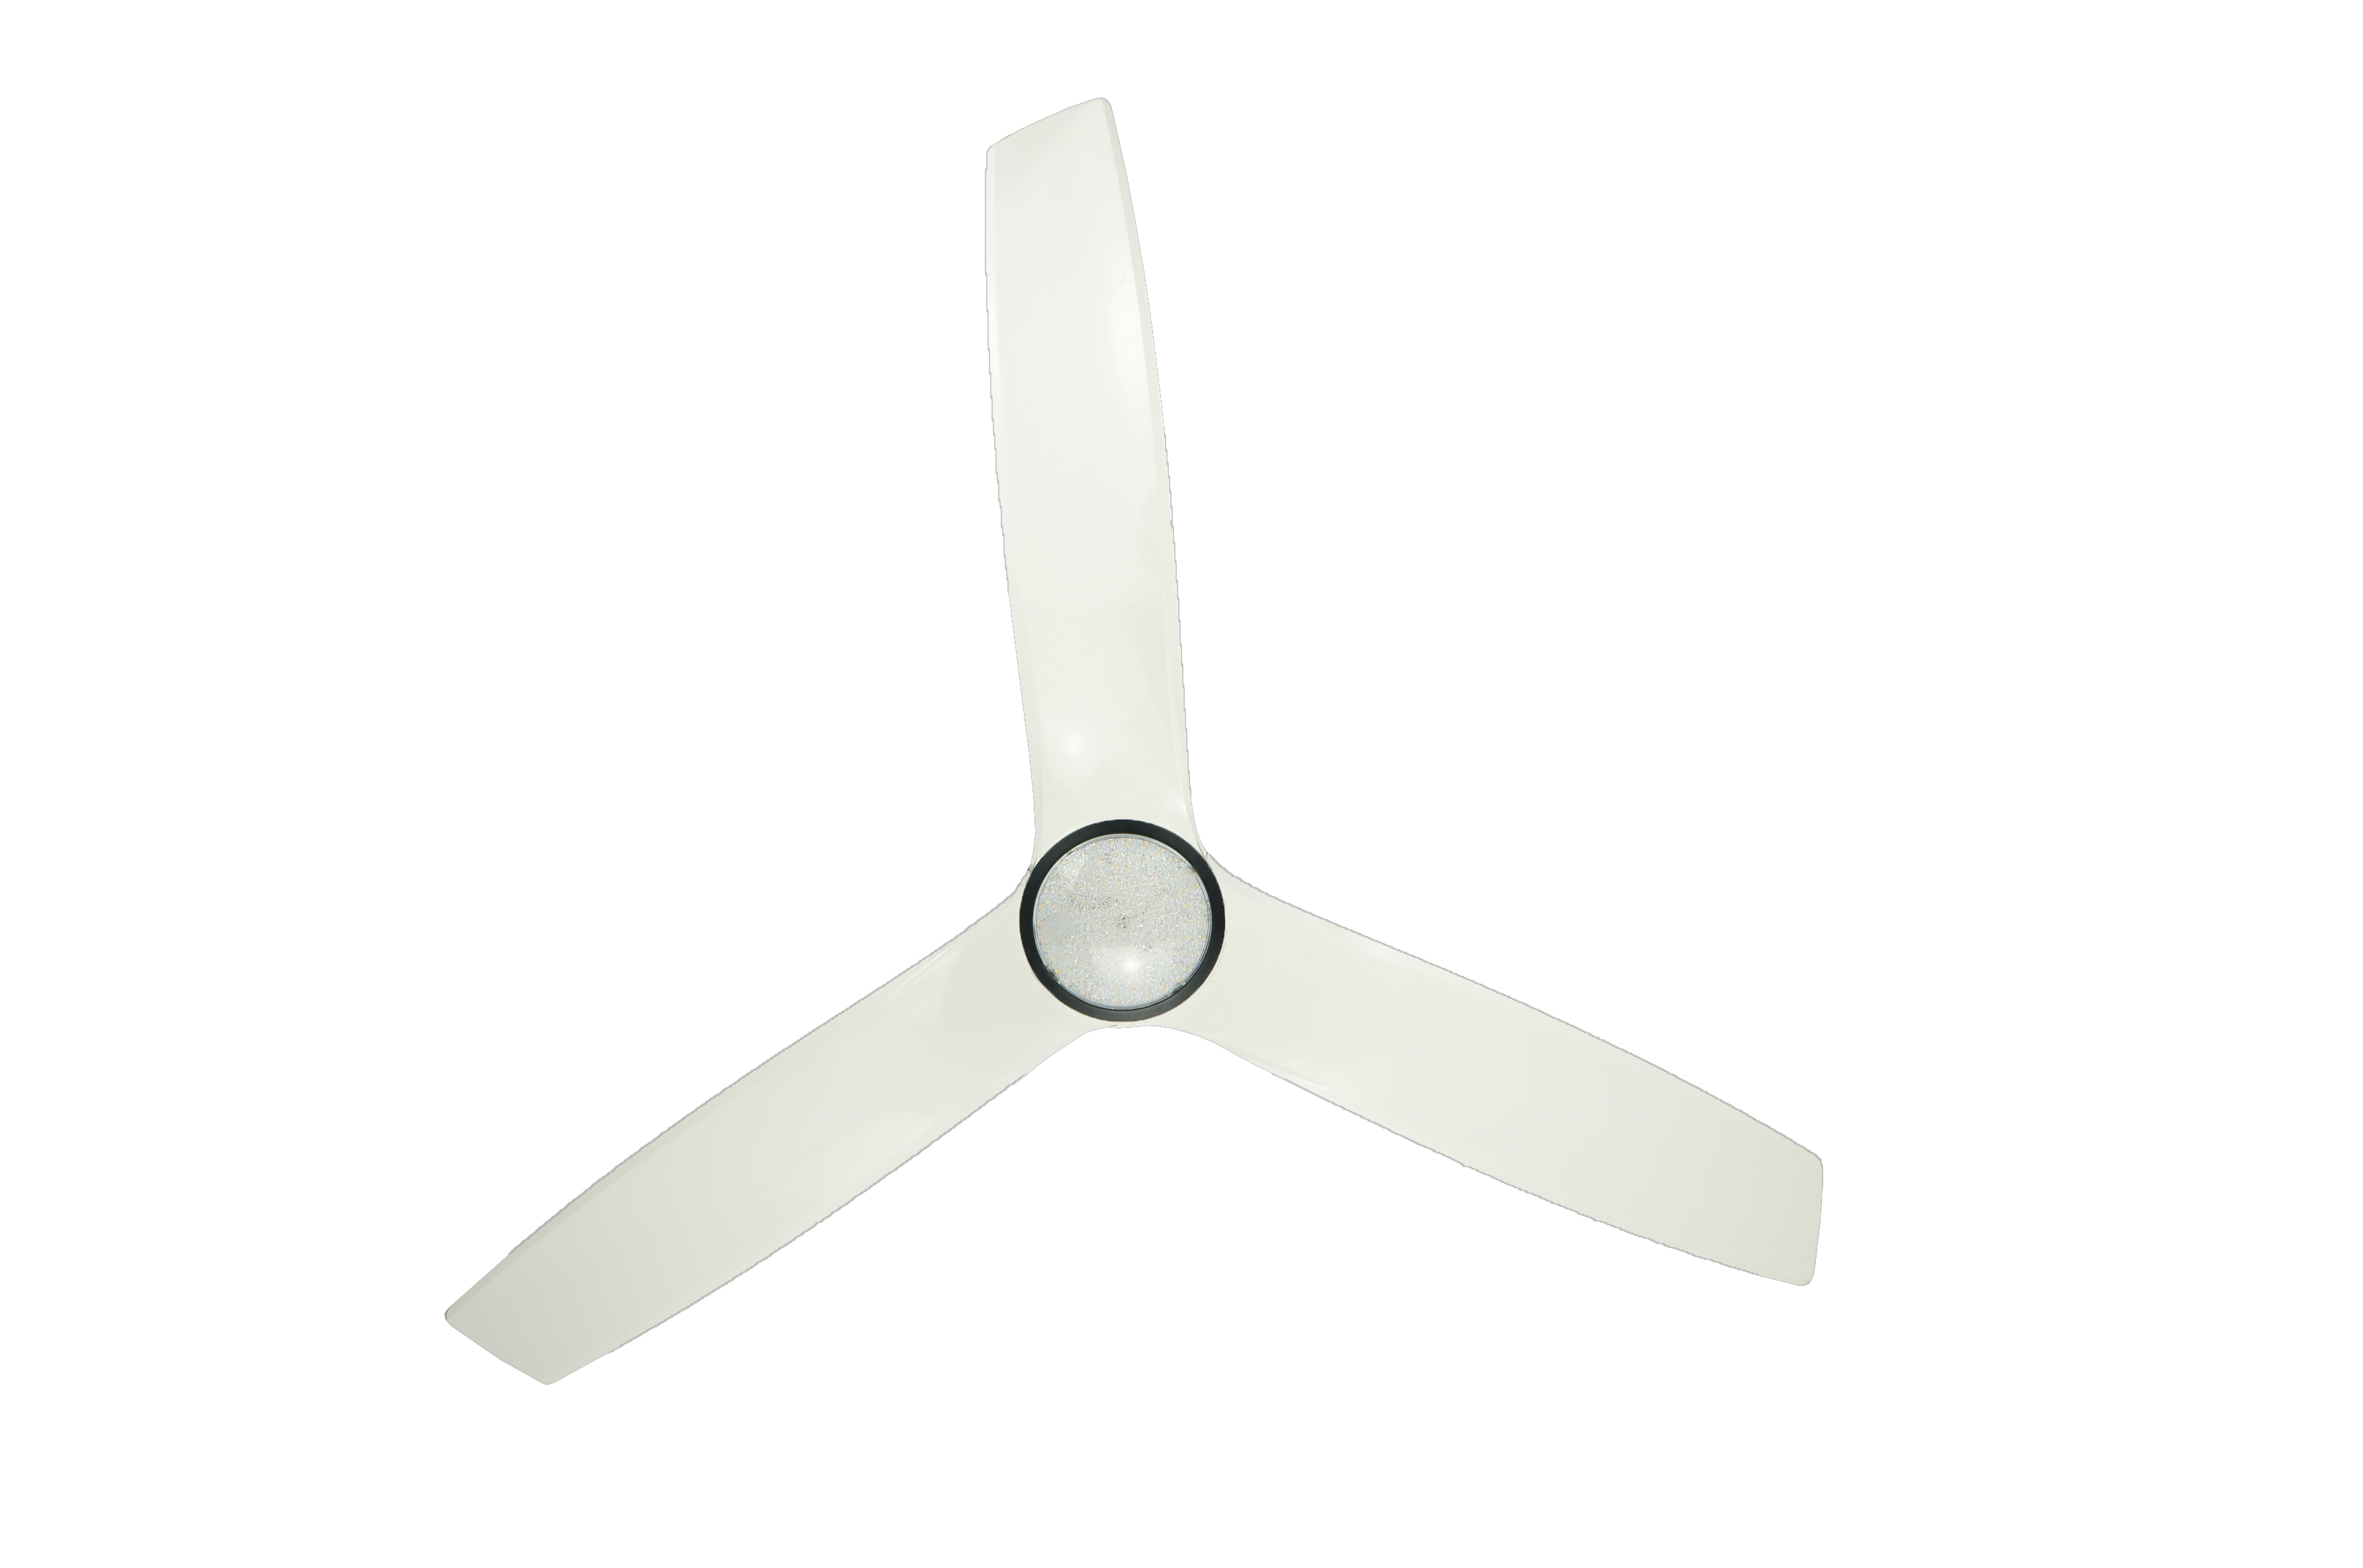 Modern Home Style White Ceiling Fan with LED Light